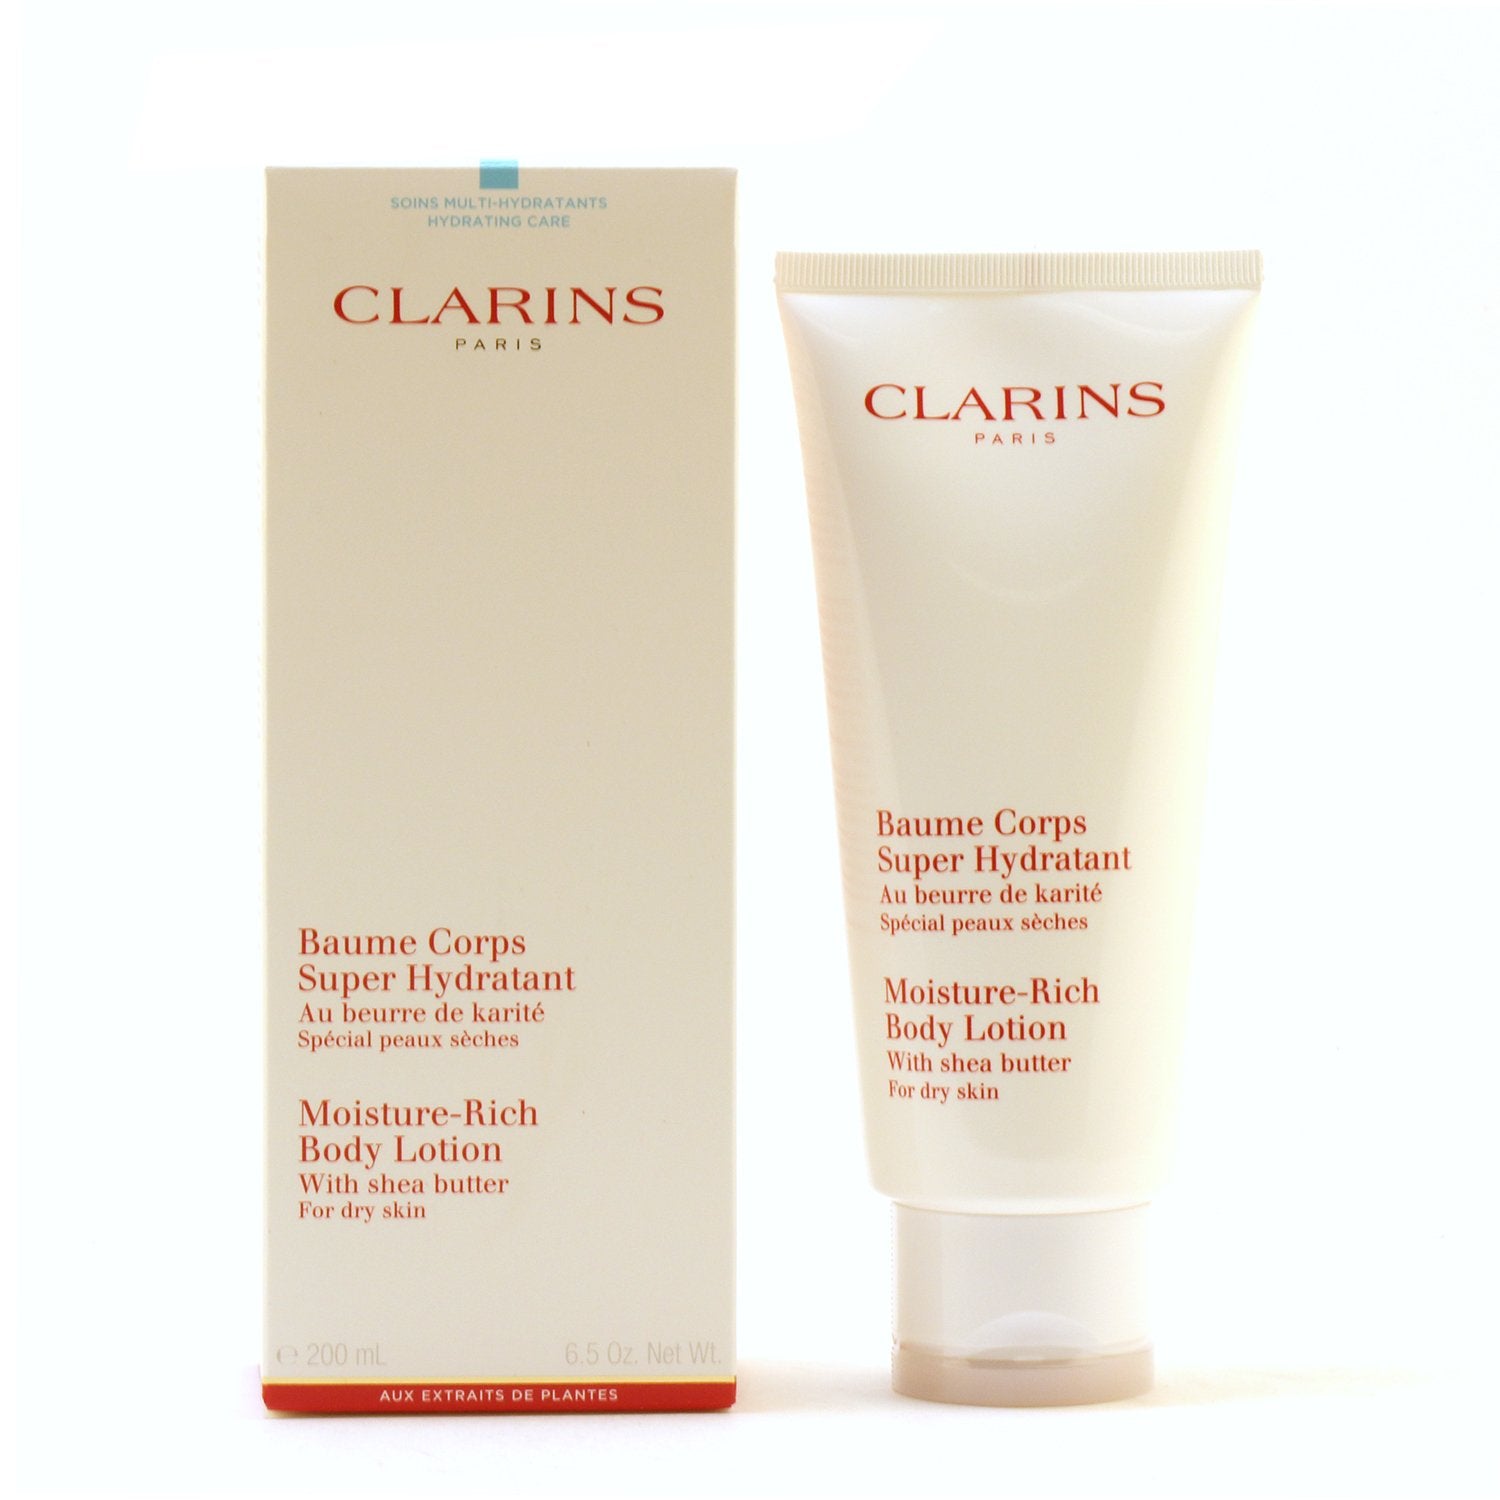 CLARINS MOISTURE-RICH BODY LOTION WITH BUTTER FOR DRY SKIN, 6.5 – Fragrance